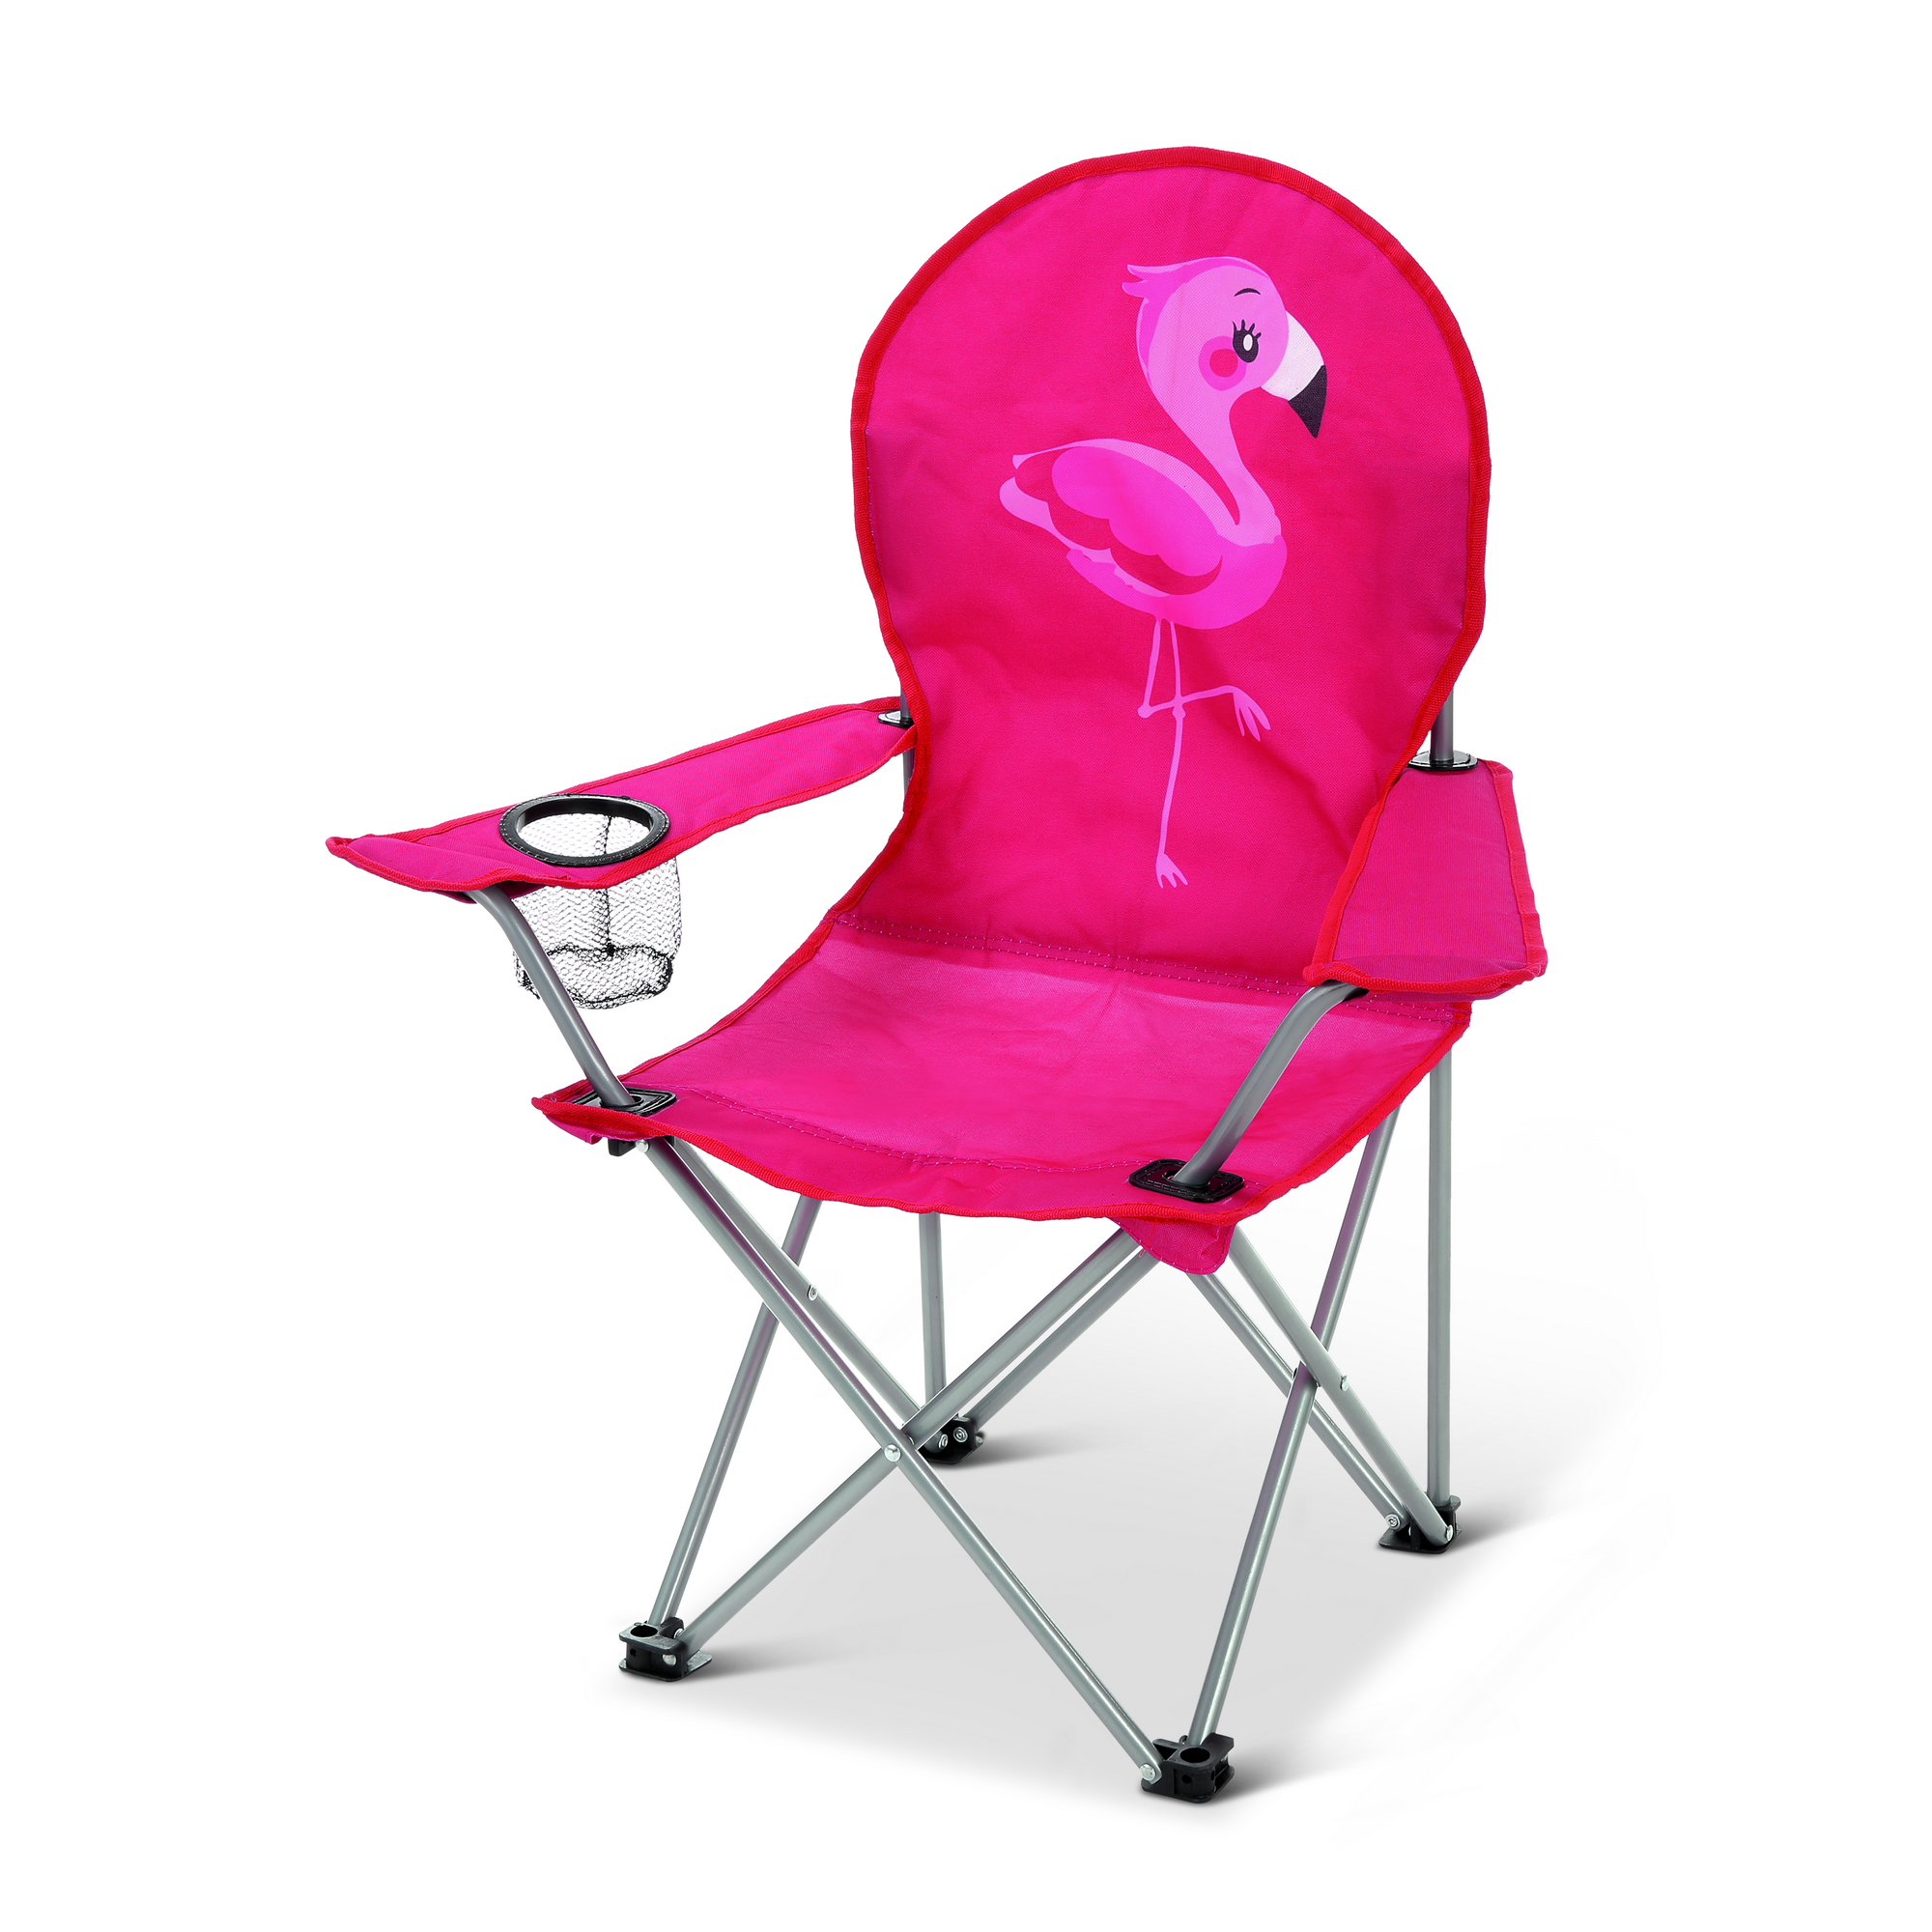 Kinder-Campingstuhl 'Flamingo' pink 38 x 65 x 38 cm + product picture